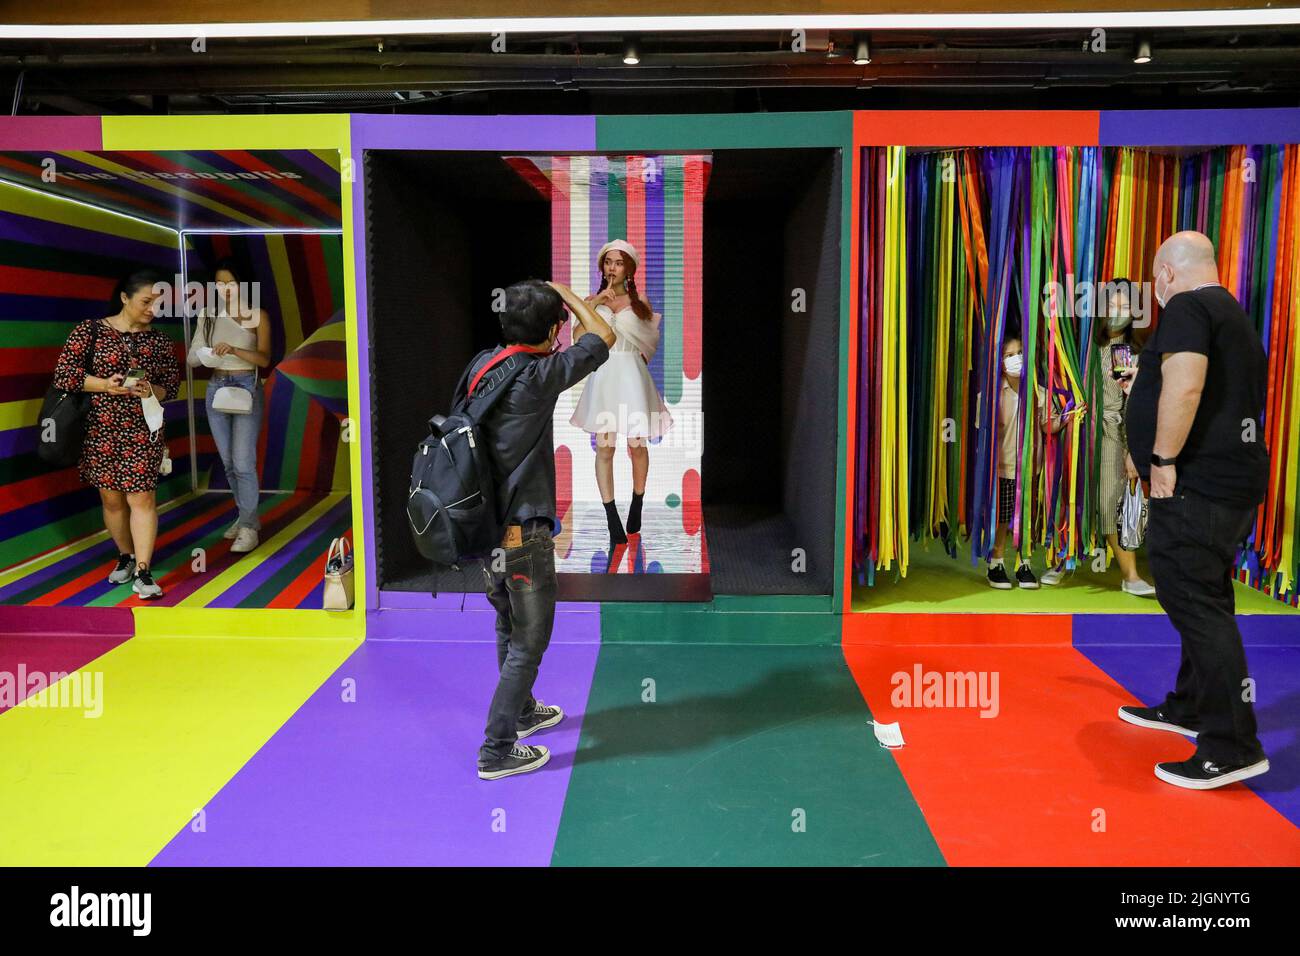 People take pictures inside a booth with rainbow colors at a shopping mall in Bangkok. Lawmakers in Thailand gave initial approval to legalizing same-sex unions, a step closer towards becoming the second territory in Asia to legalize same-gender marriages. Thailand. Stock Photo